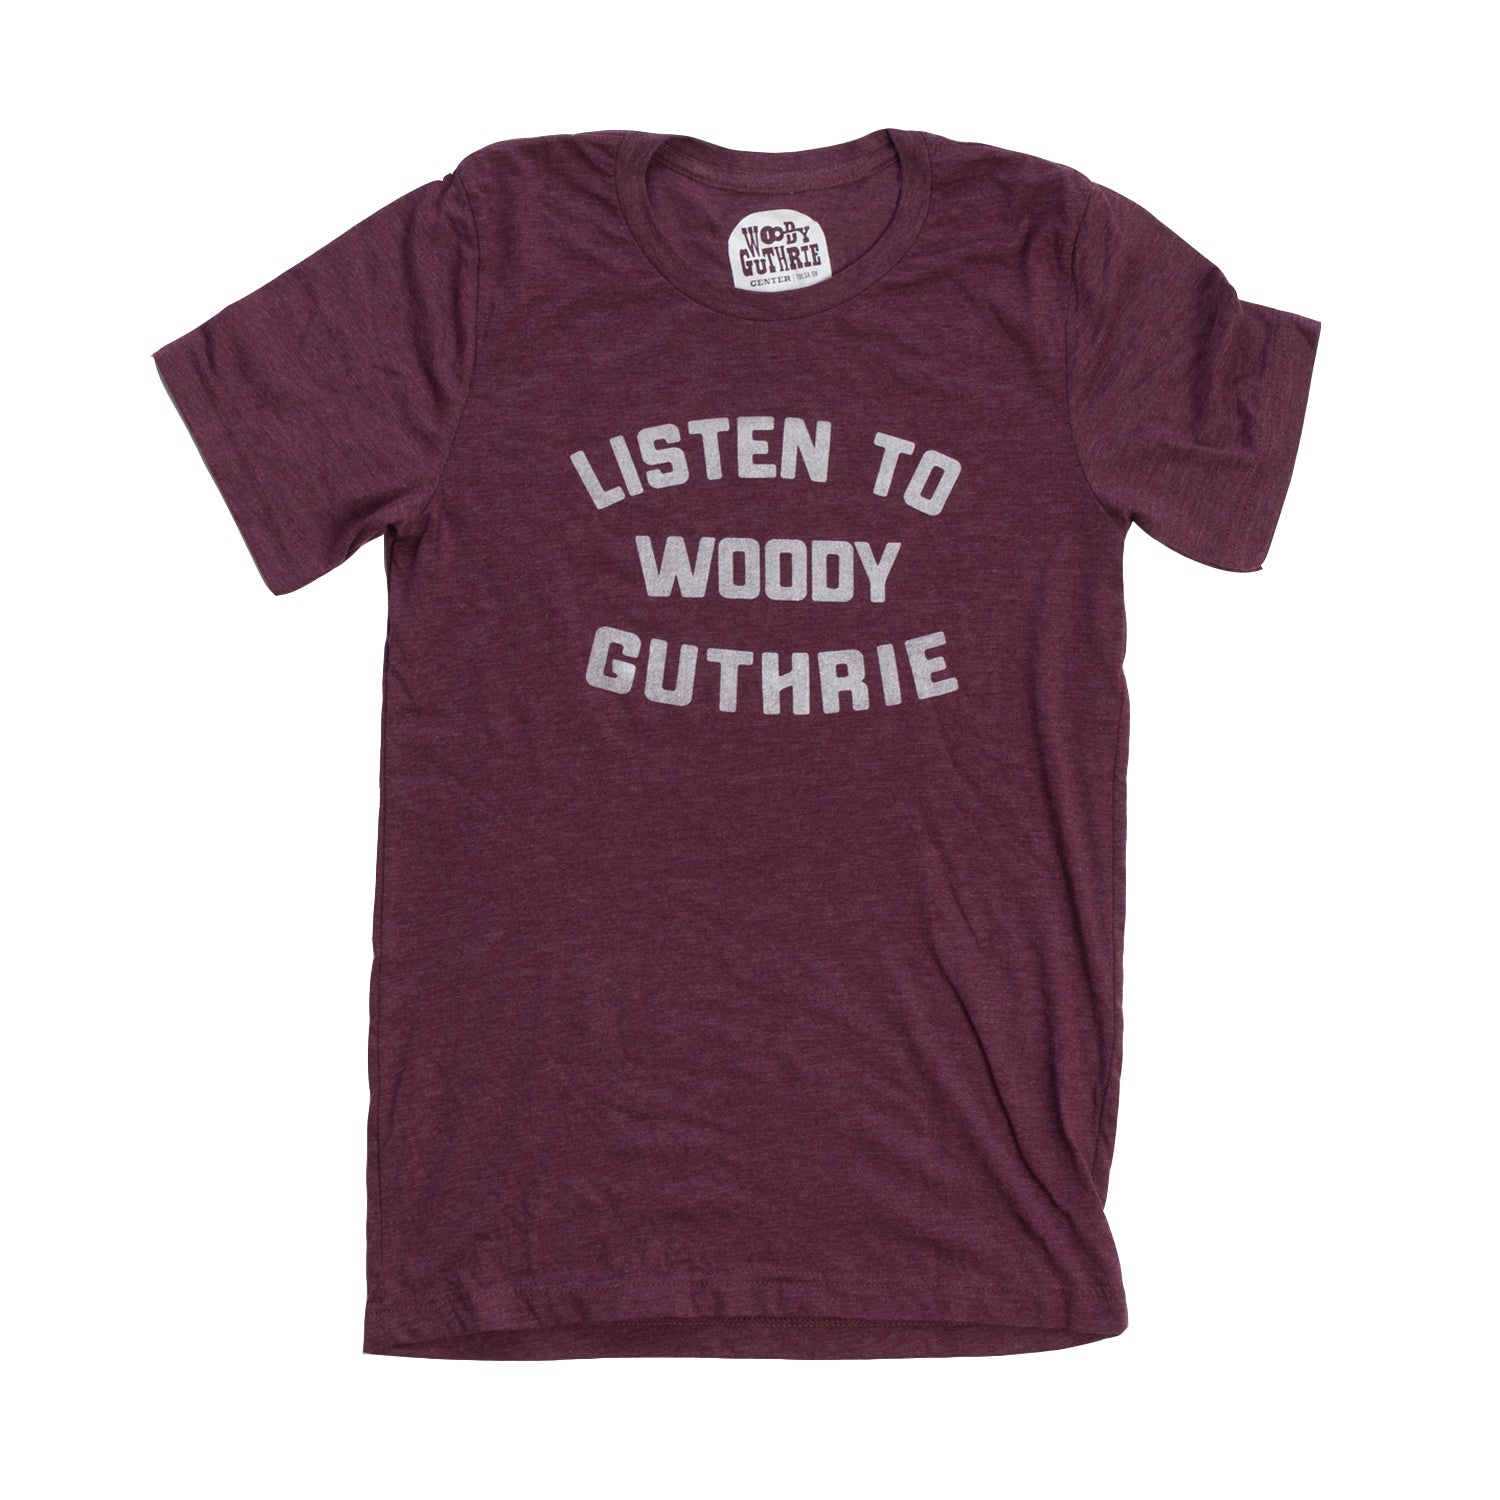 Listen to Woody Guthrie Shirt Red - Front